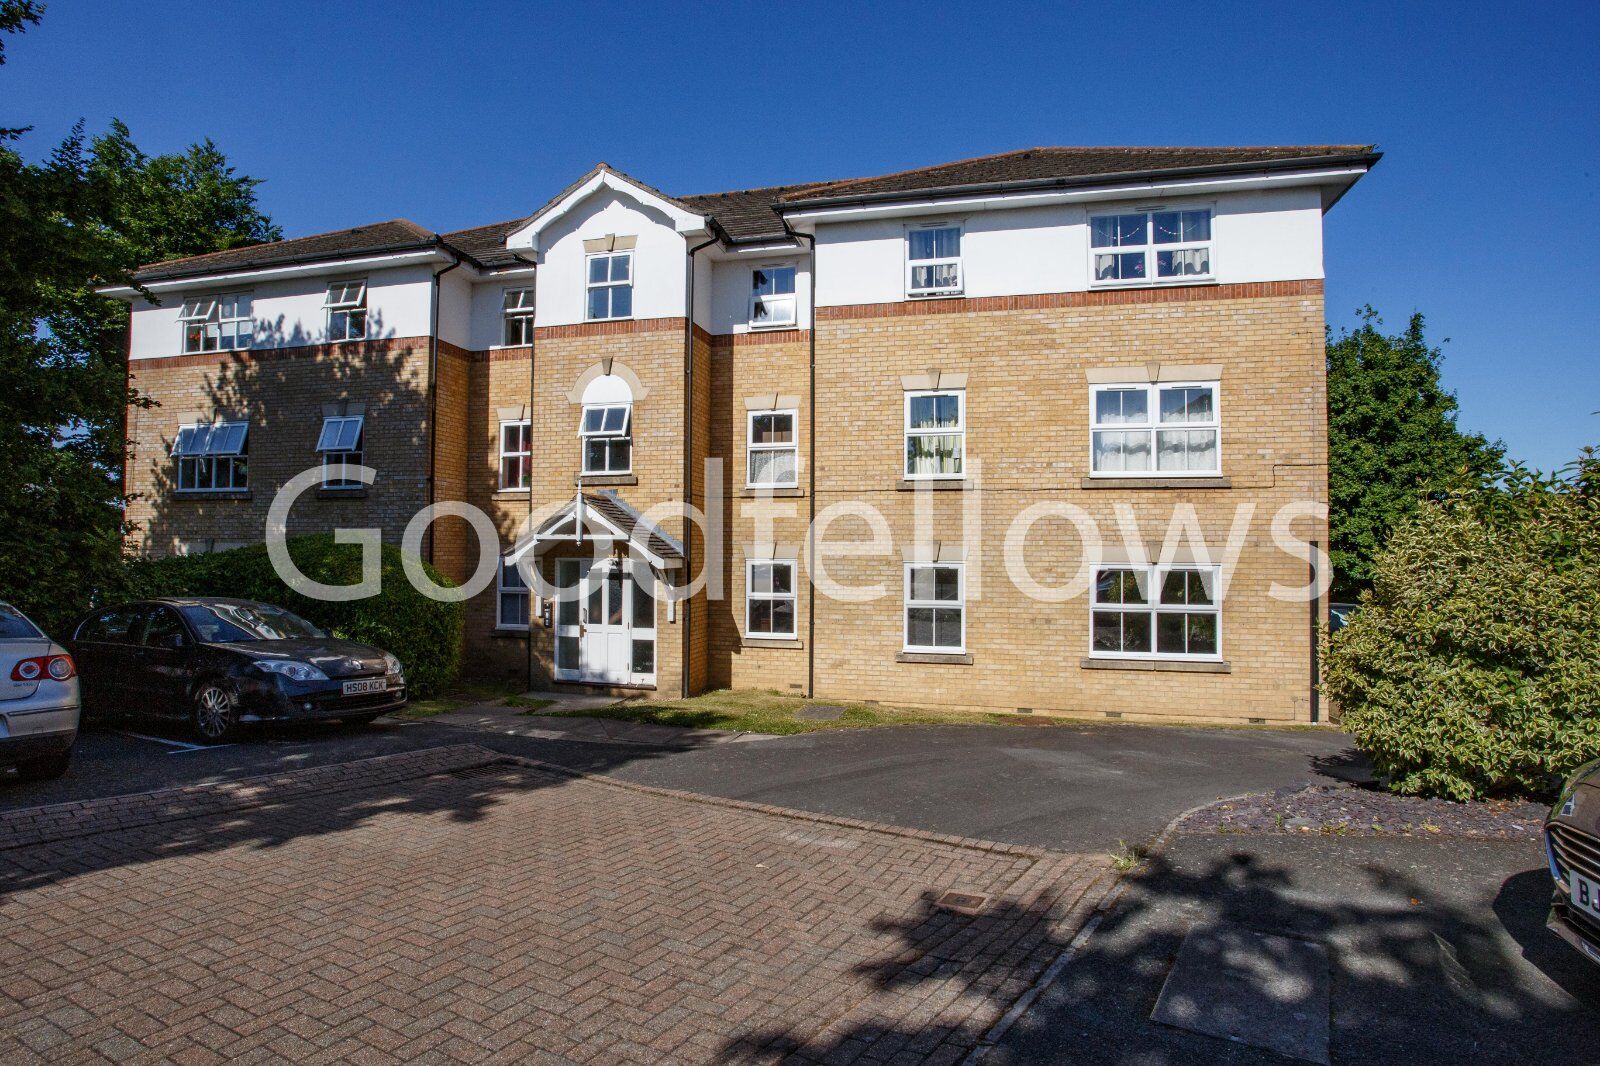 1 bedroom  flat to rent, Available now Hatfield Close, Sutton, SM2, main image